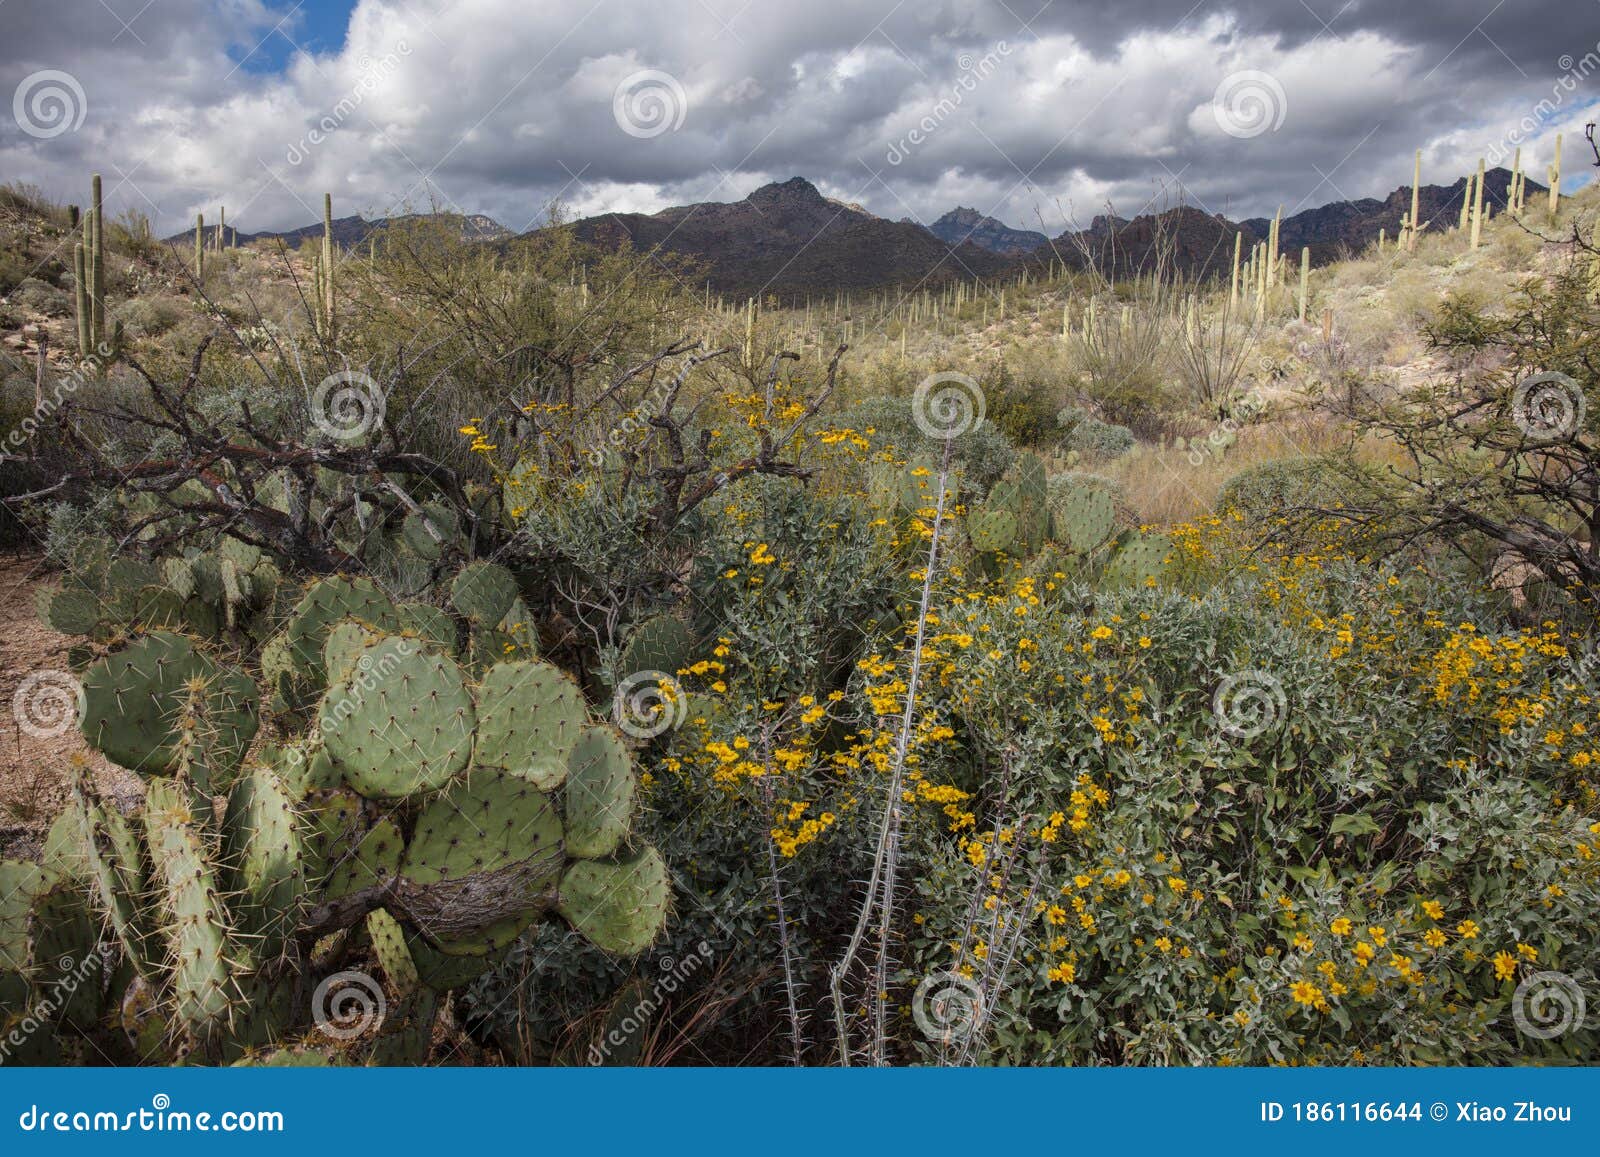 Wilderness and Cactus in Arizona Stock Photo - Image of hire, plant ...